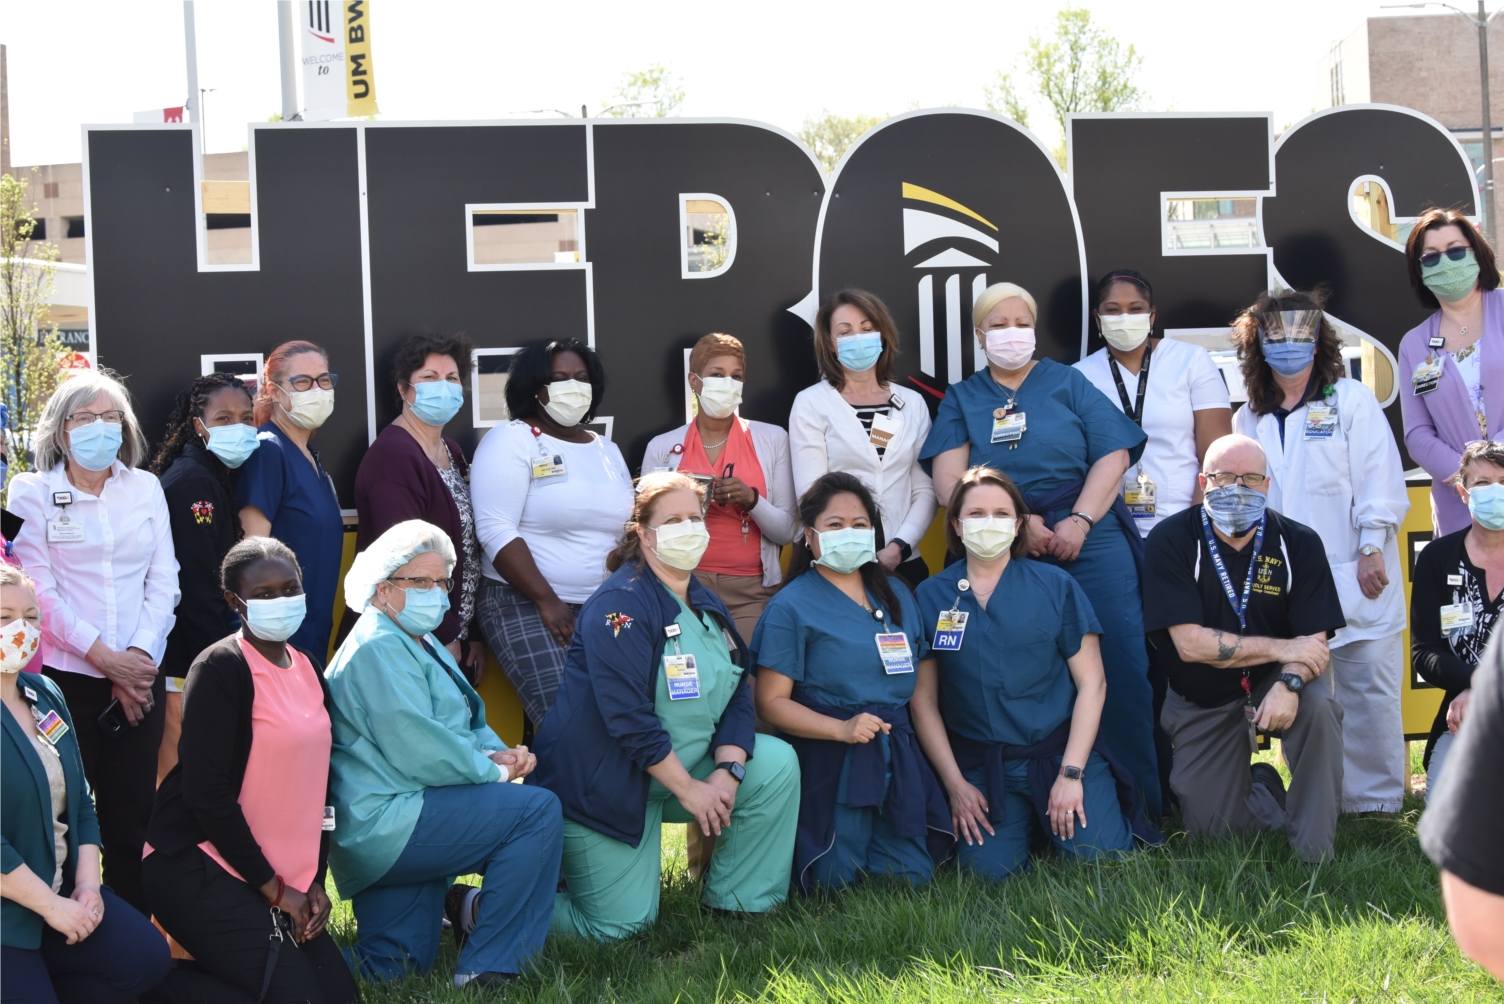 UM BWMC employees pose in front of "Heroes Work Here" sign, in support of their brave work during the COVID-19 response.